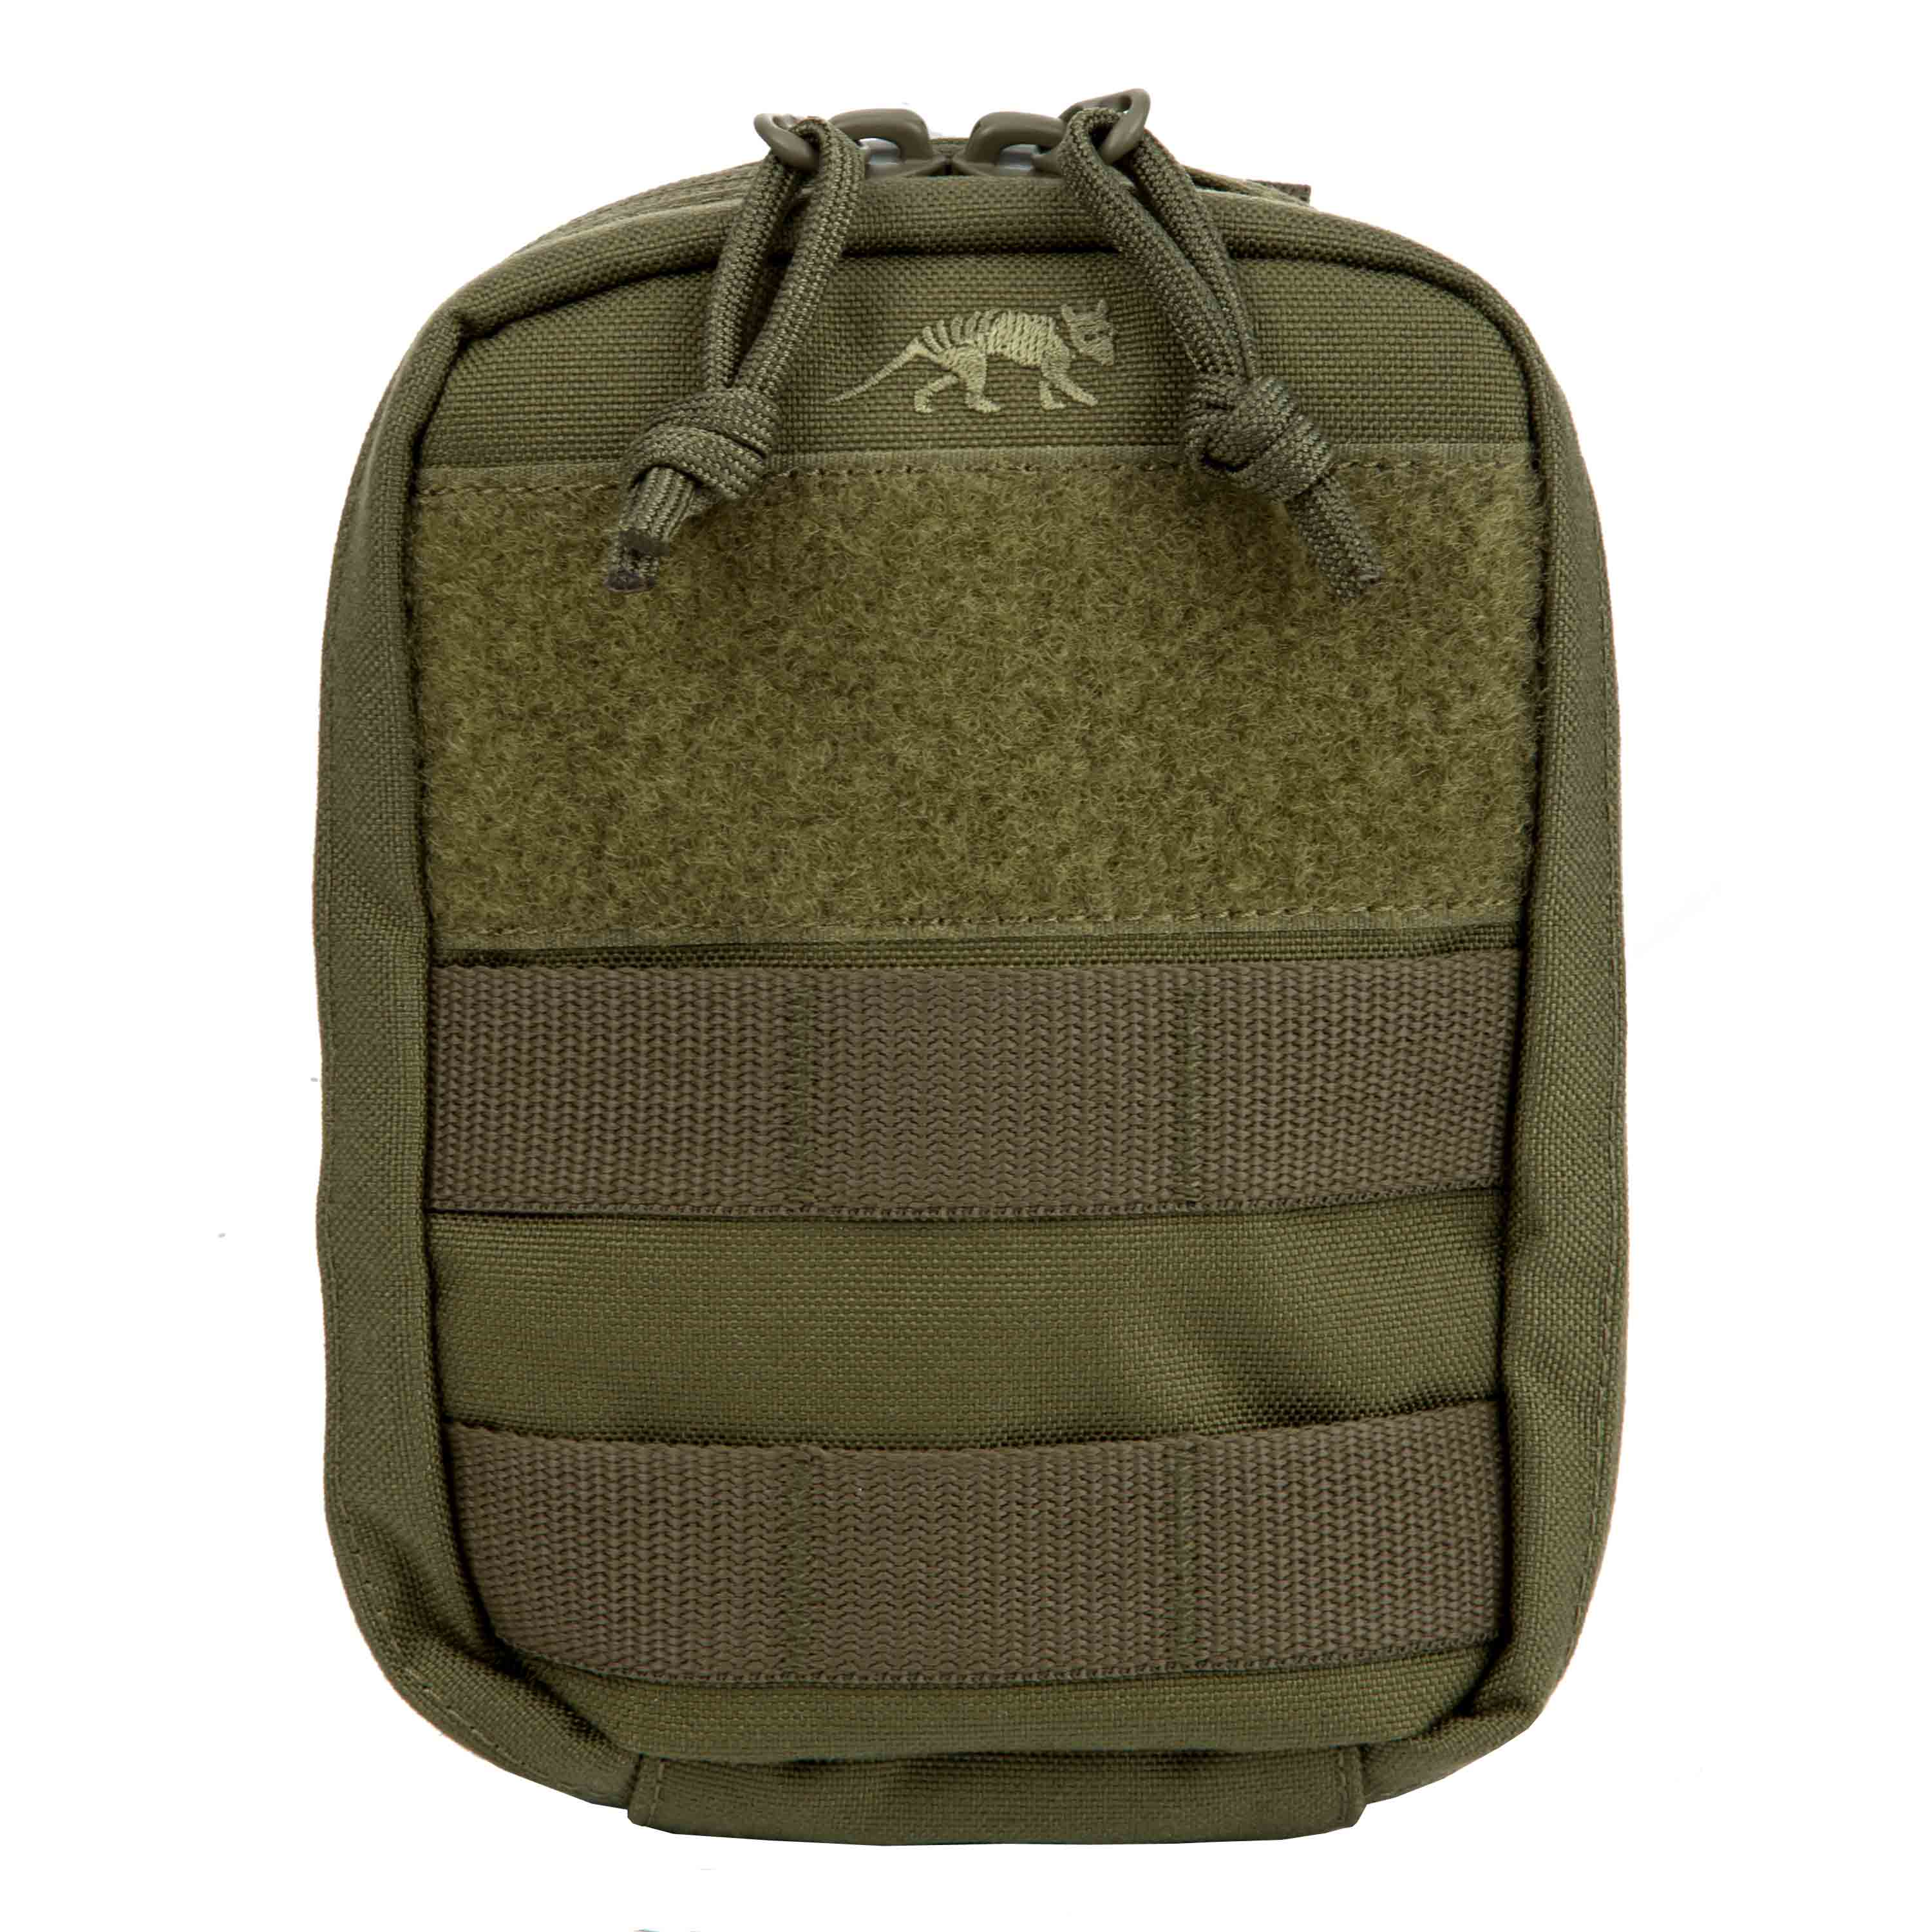 Purchase the TT Tac Pouch 1 Trema olive by ASMC